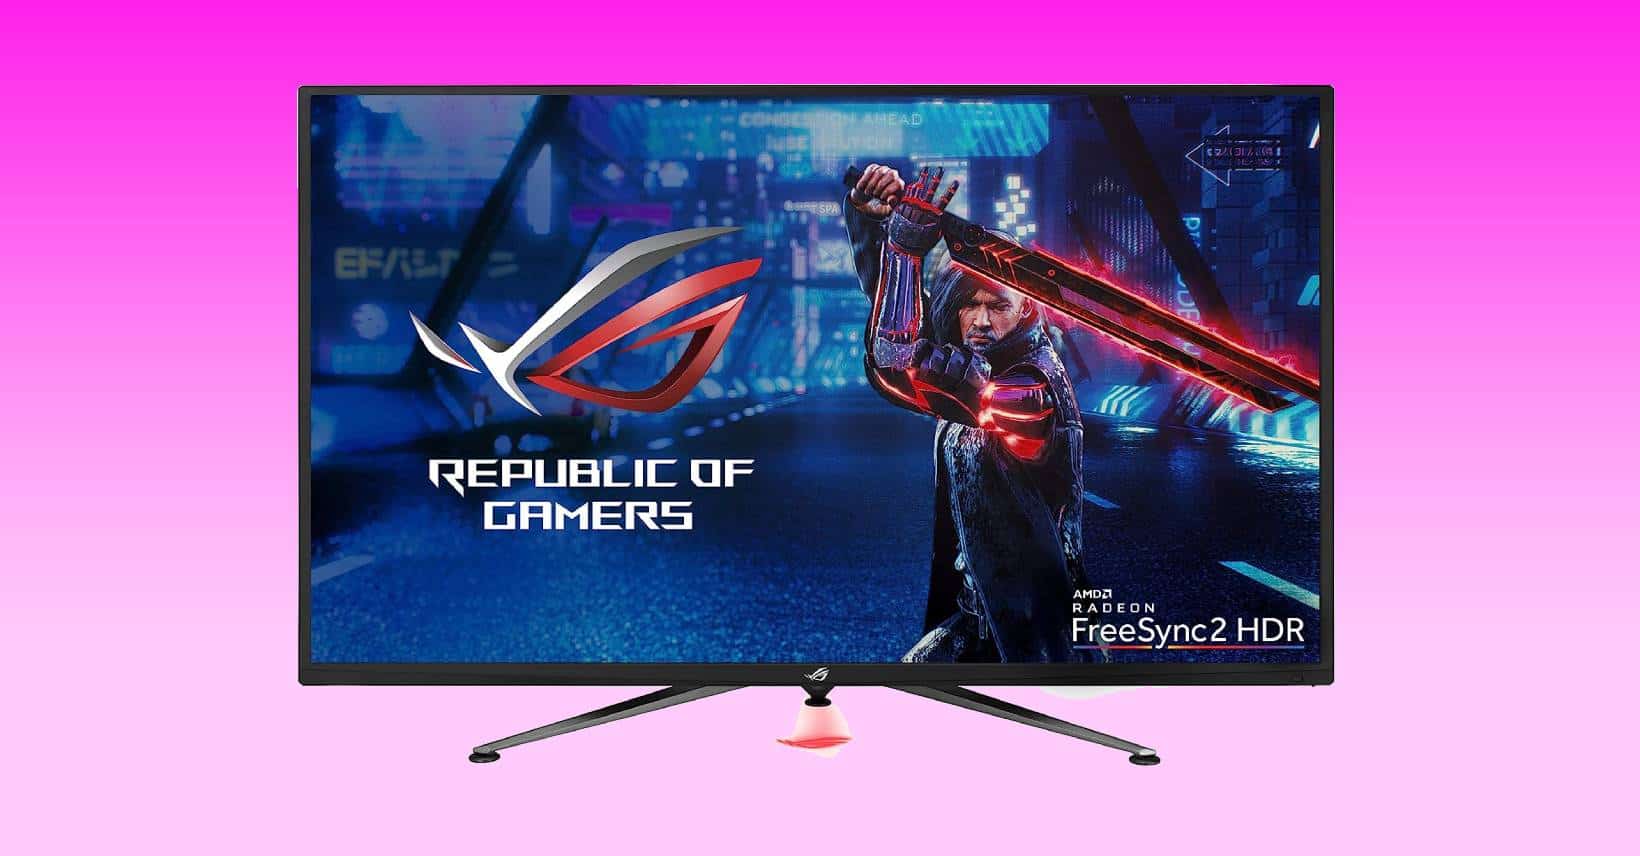 Asus ROG Strix XG438Q 43 Inch Gaming Monitor just hit all time low price on Amazon